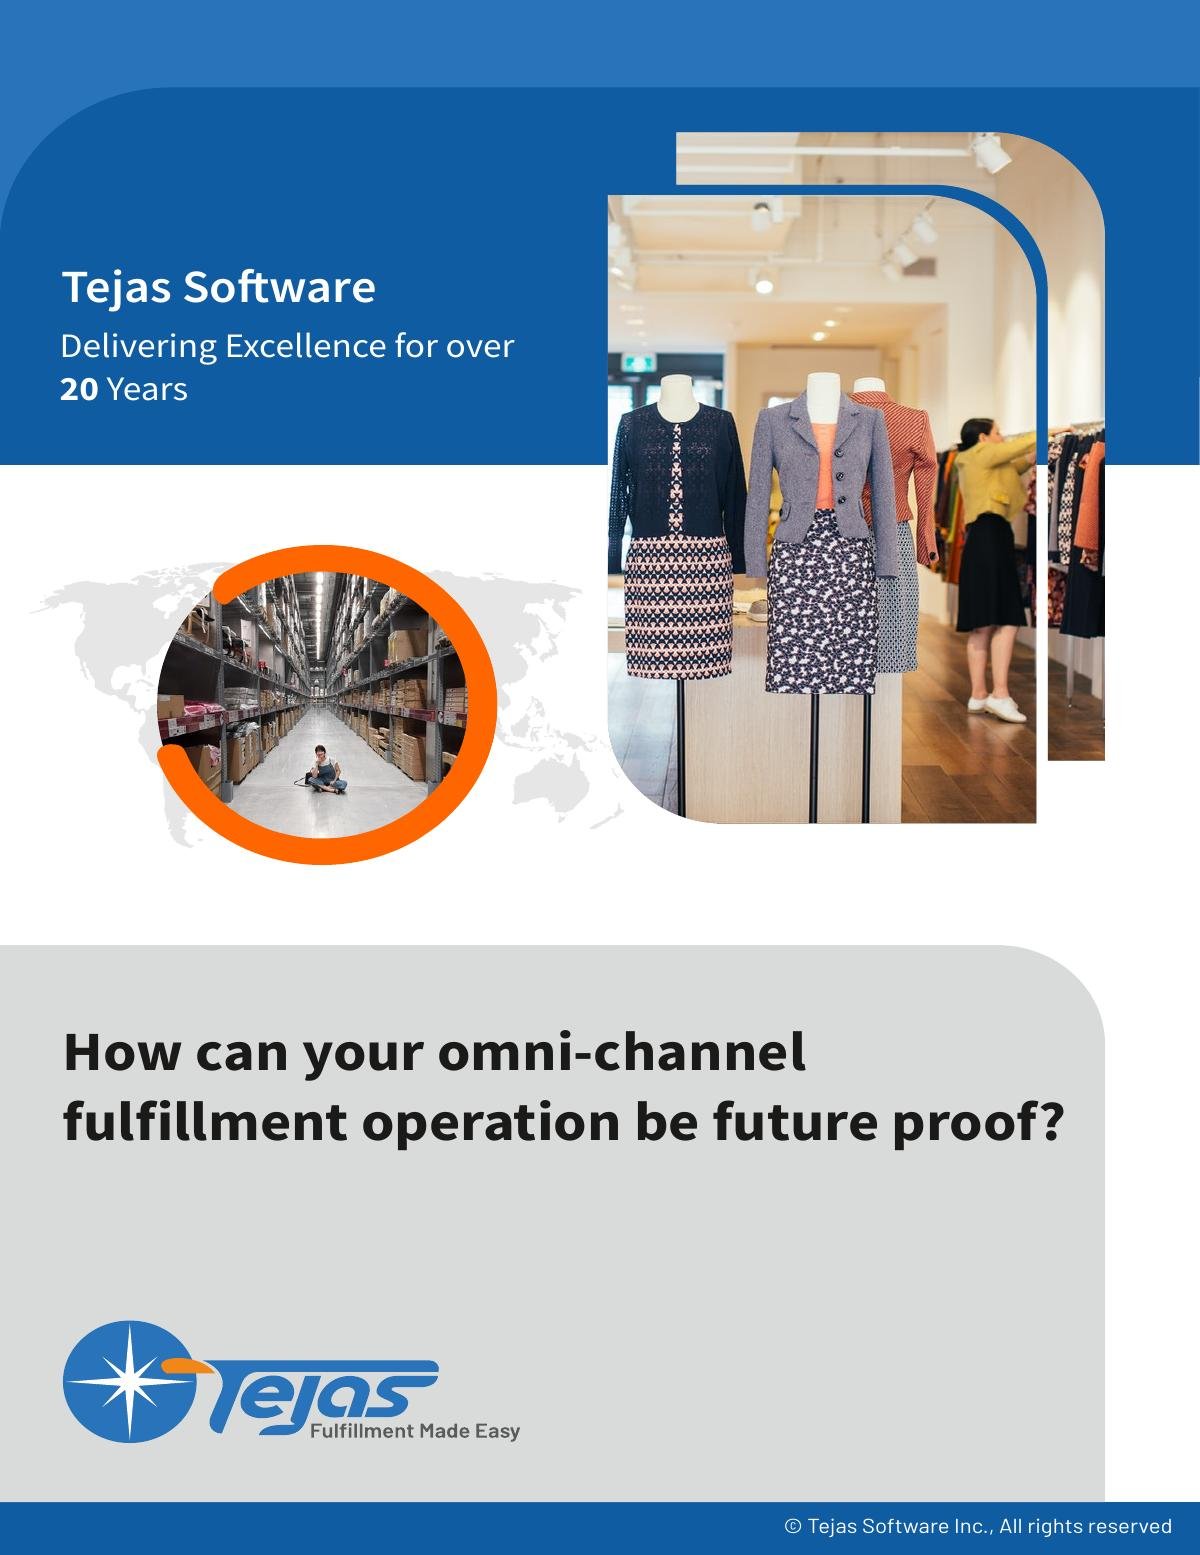 How can your omni-channel fulfillment operation be future proof?